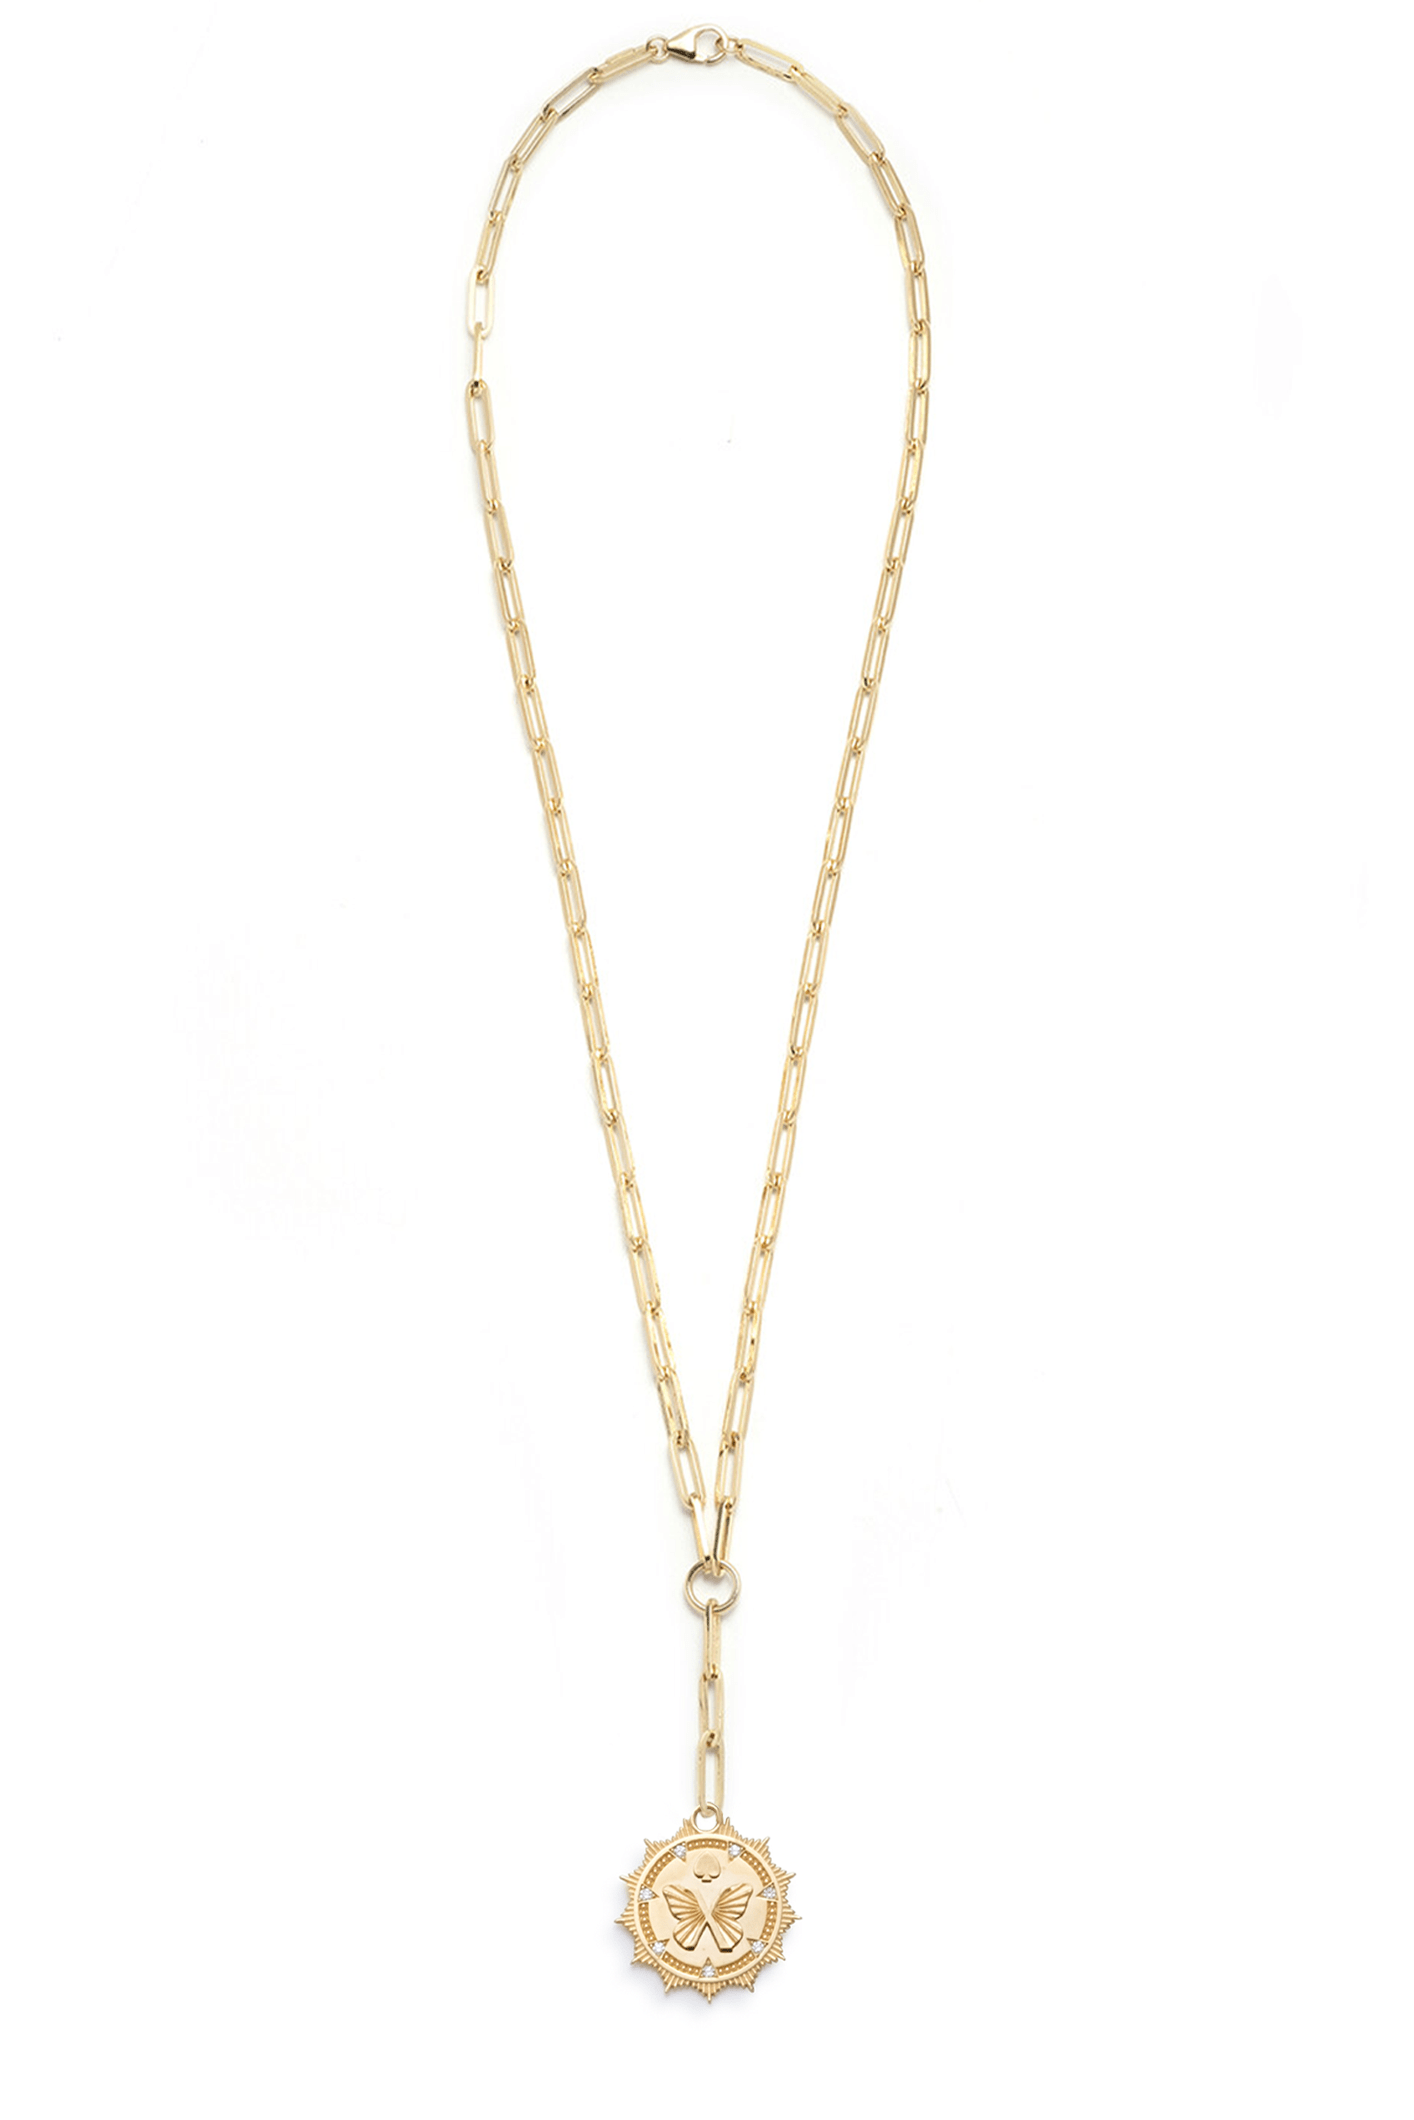 FOUNDRAE-Reverie Classic Fob Clip Extension Chain Necklace-YELLOW GOLD